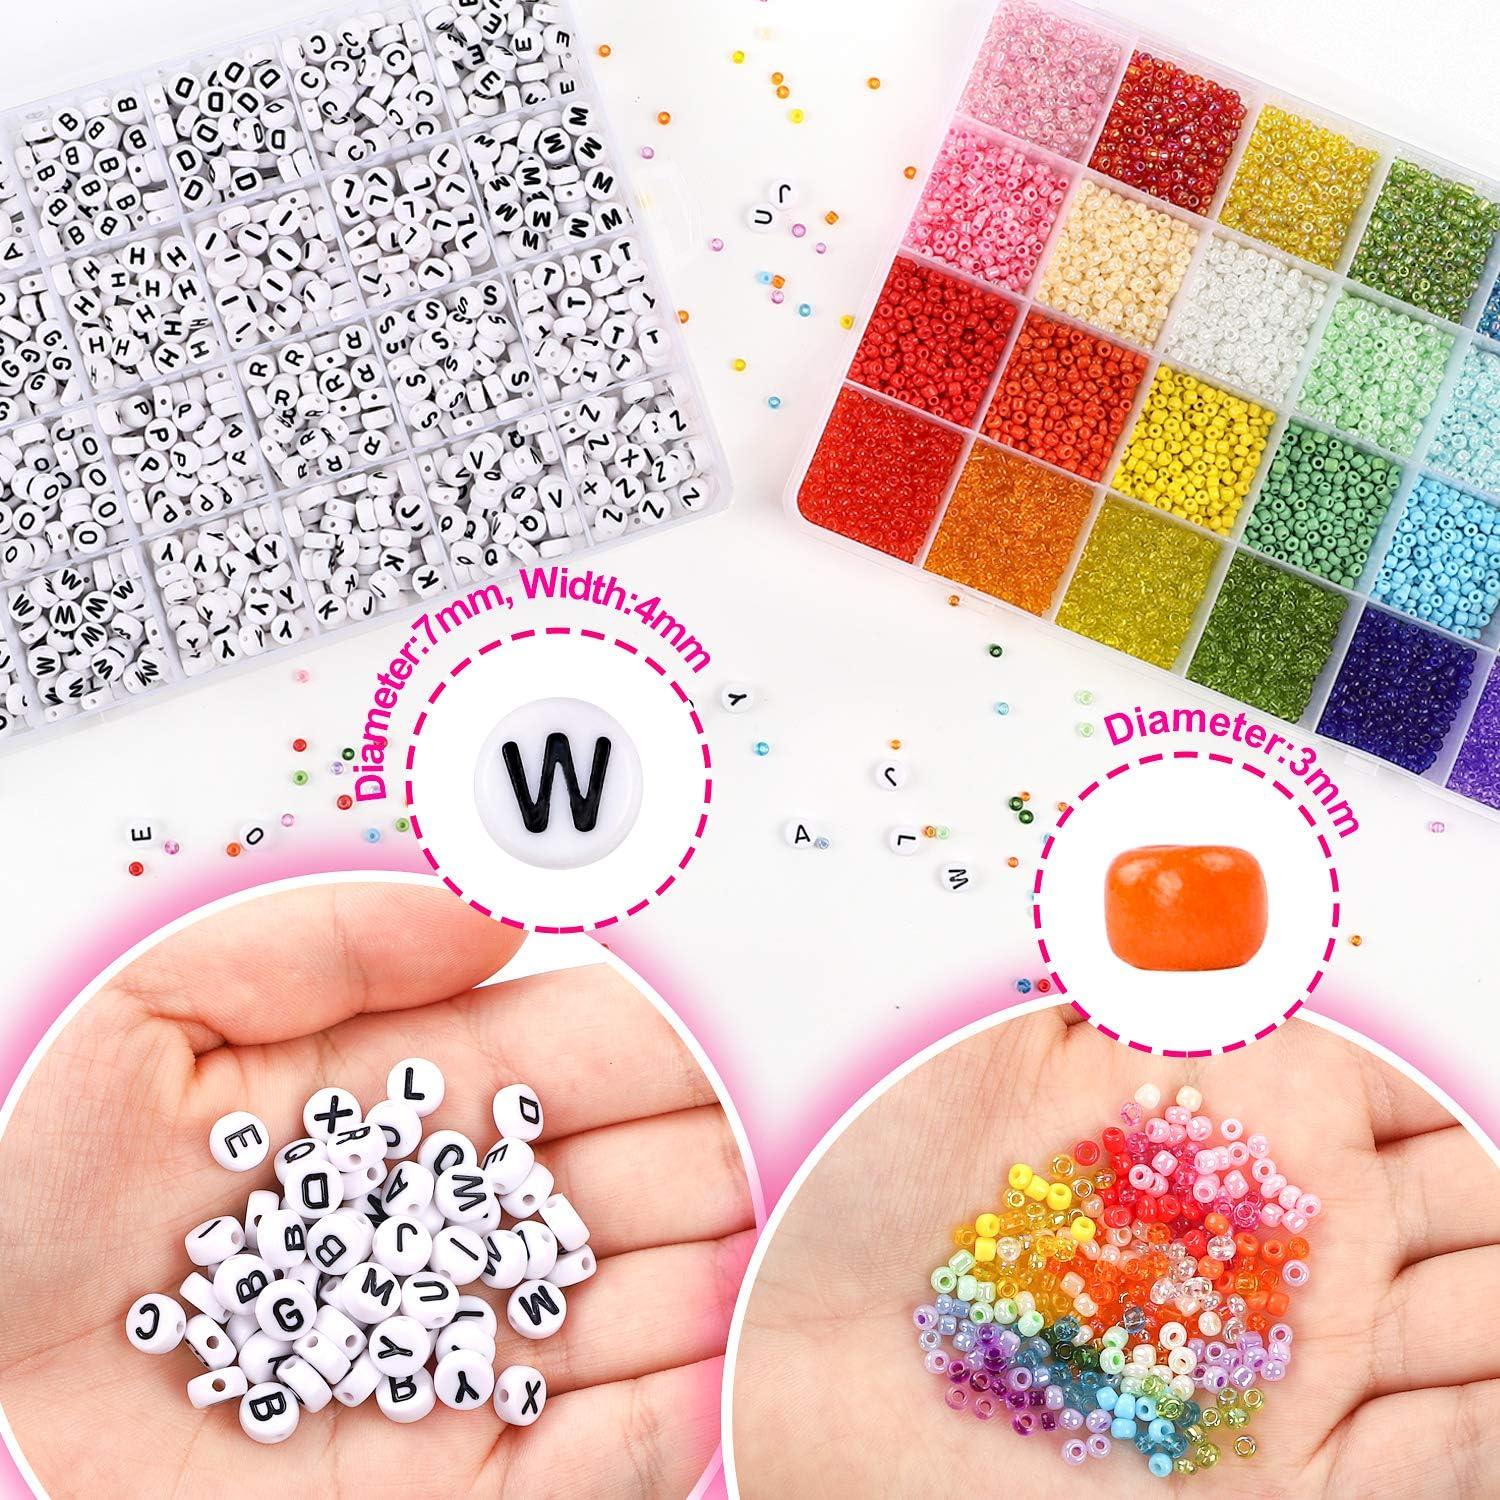 DIY Letter and Seed Bead Kit - over 12,000 pieces